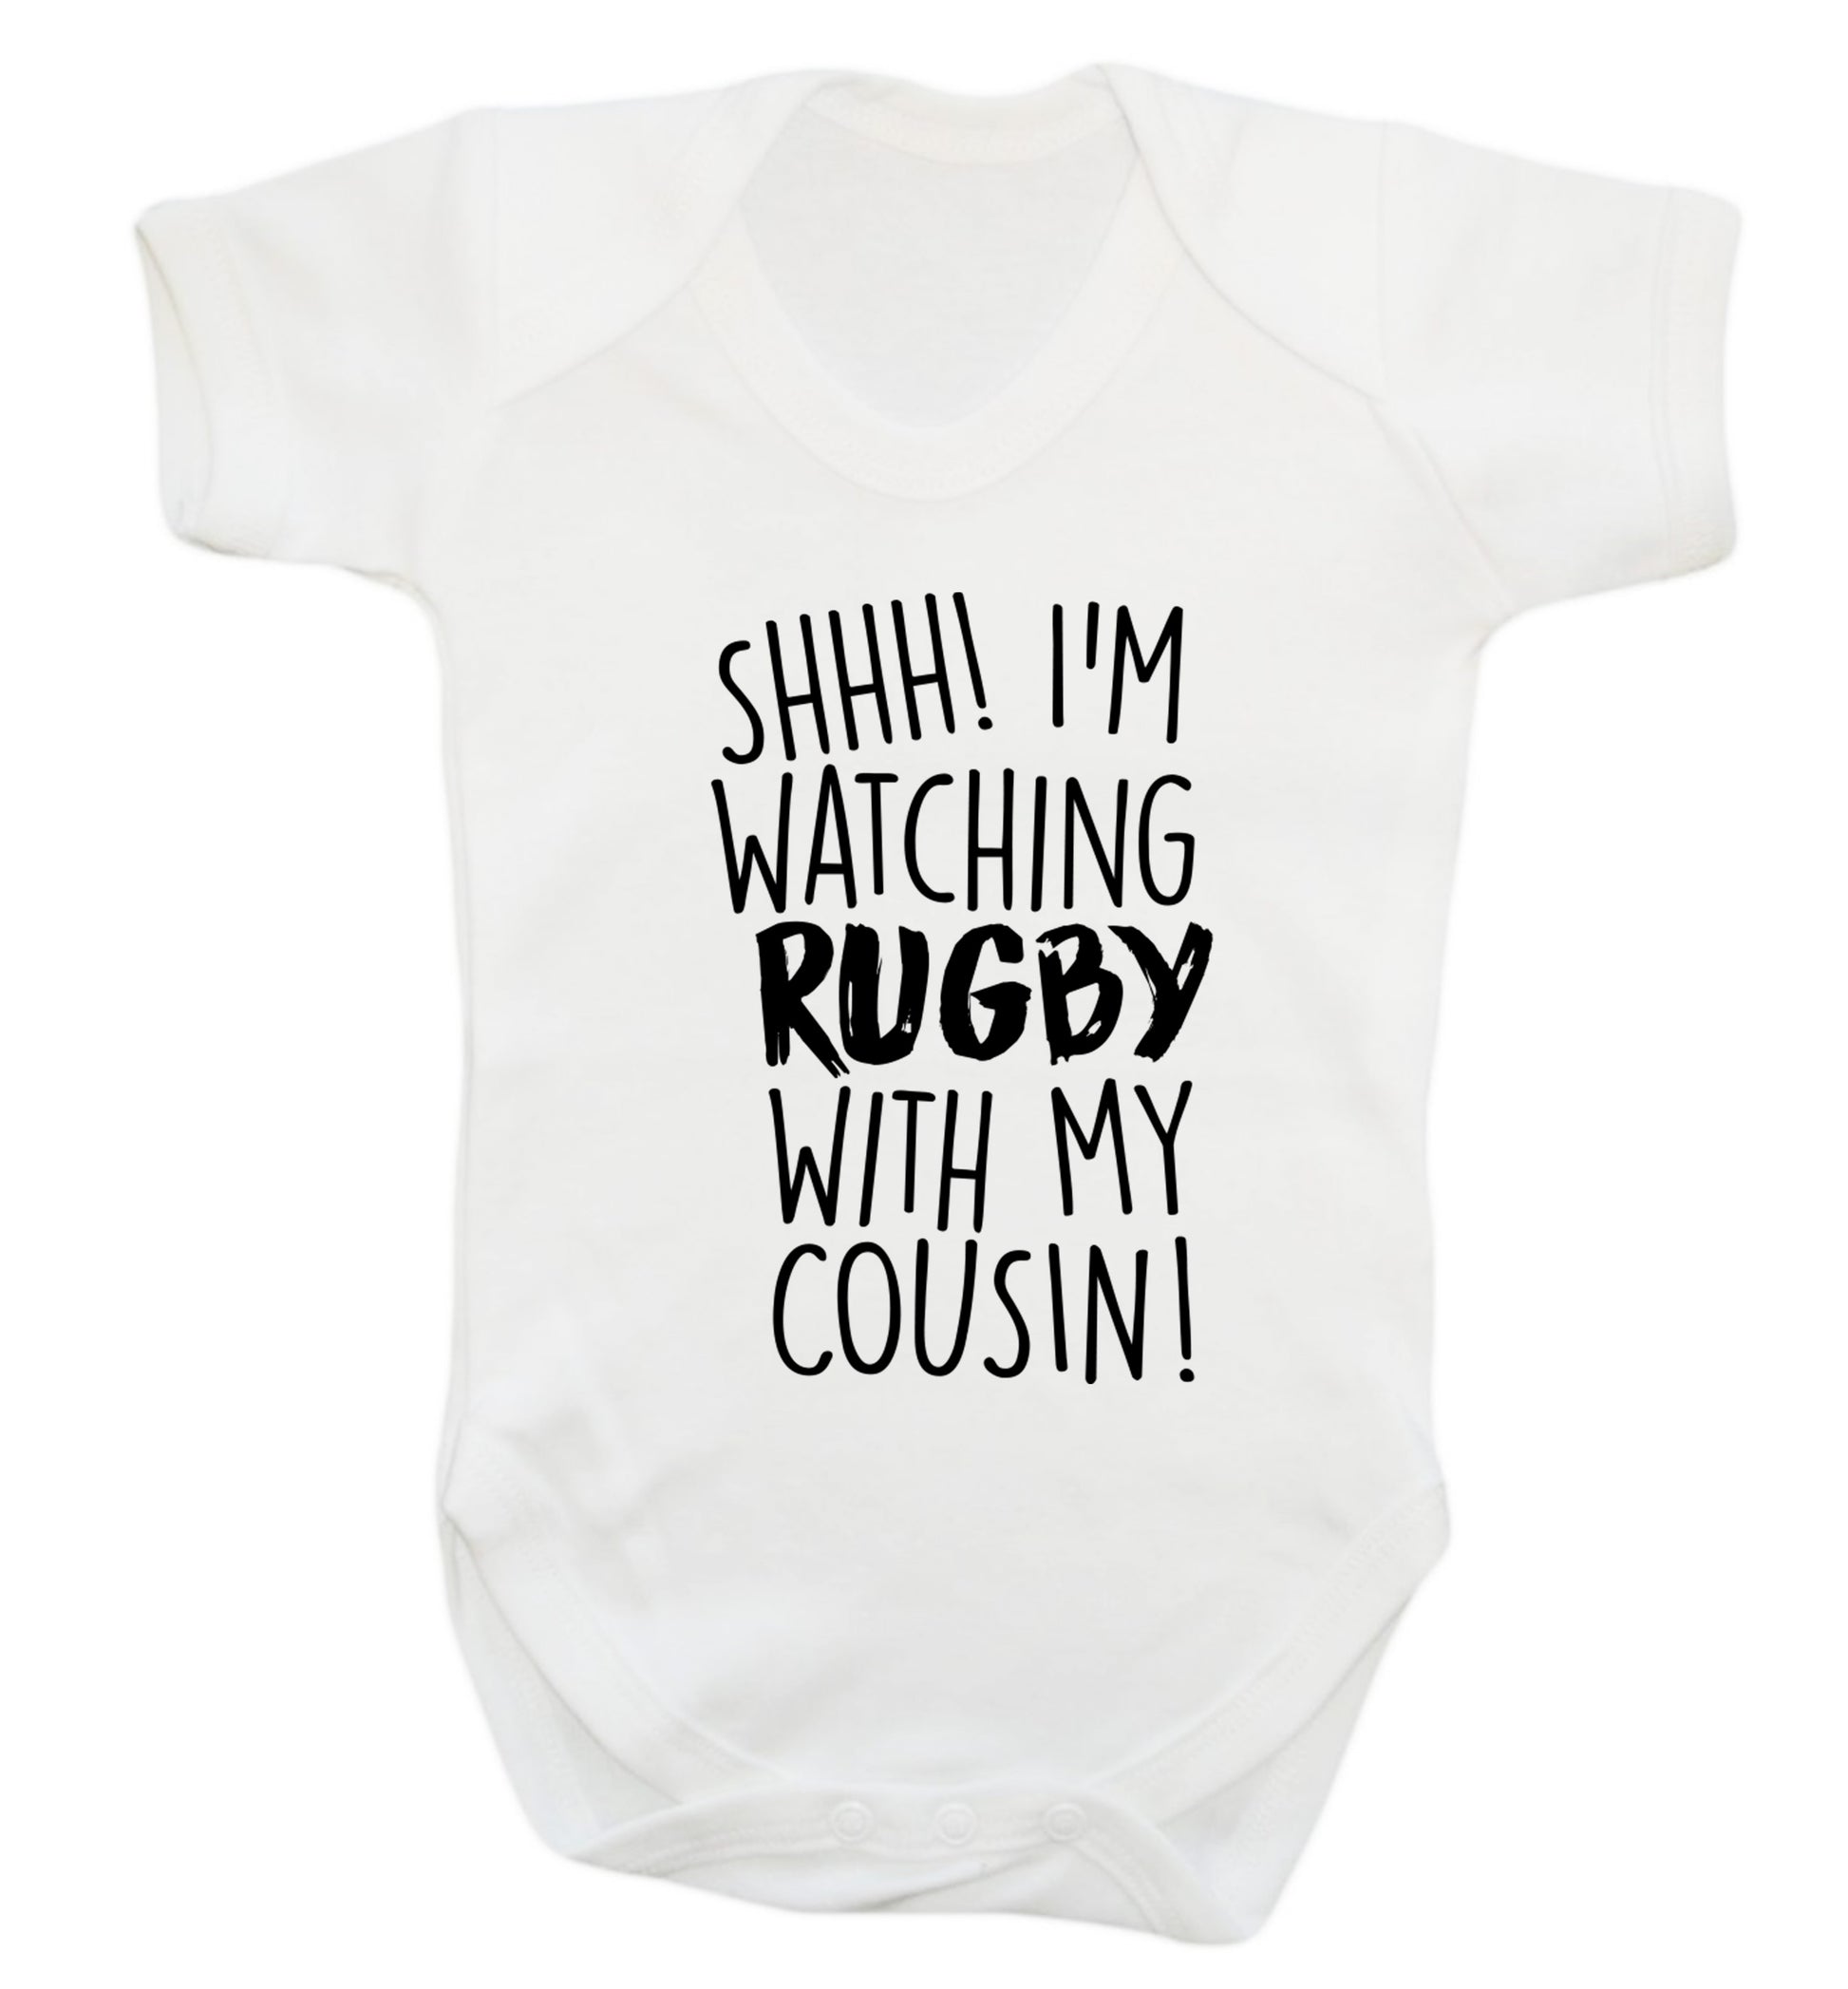 Shhh I'm watching rugby with my cousin Baby Vest white 18-24 months